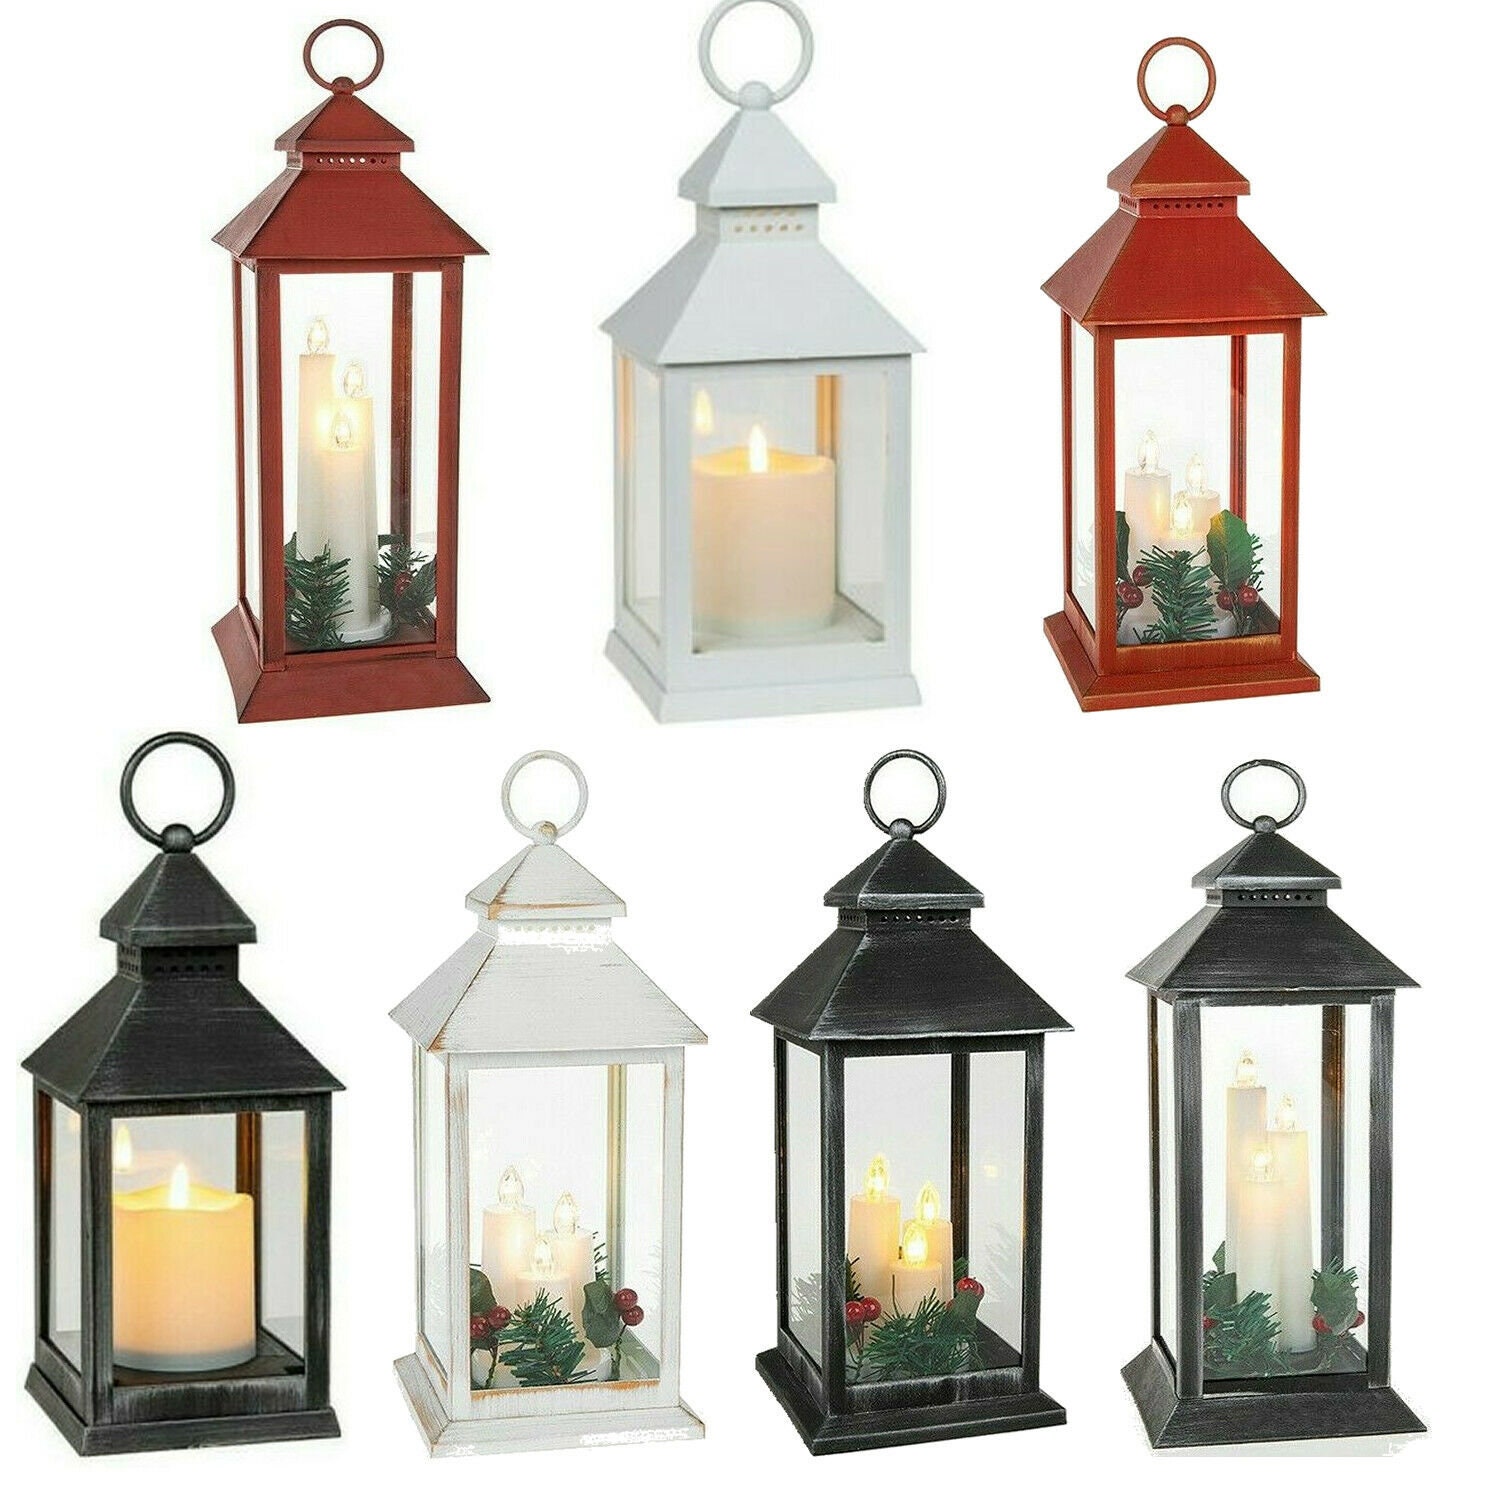 Flame Effect Flickering Indoor LED Battery Powered Hanging Candle Lantern Home 